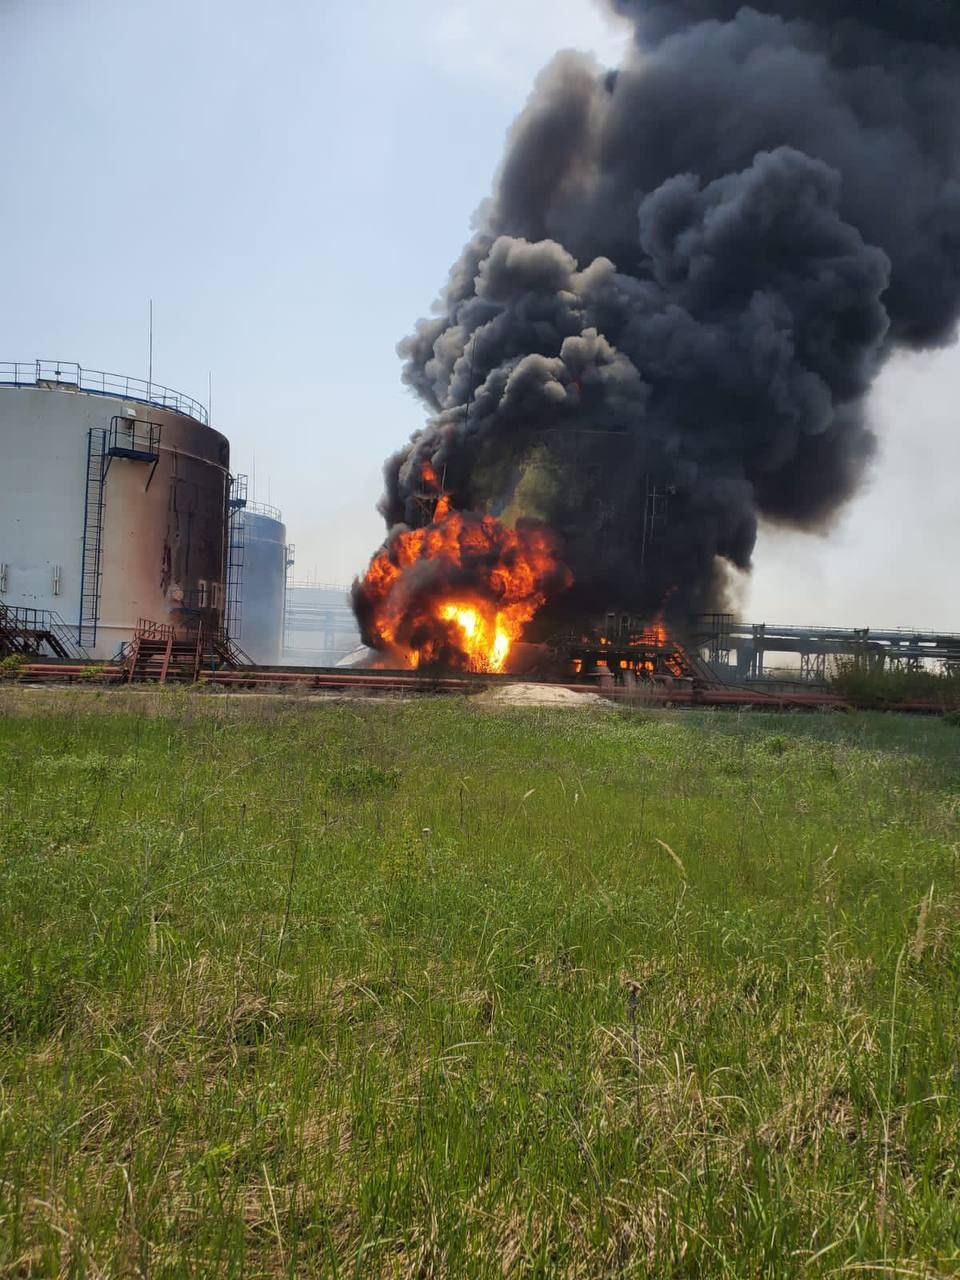 Defense Express / Oil refinery plant in Luhansk region was hit once again by Russians / Day 75th of War Between Ukraine and Russian Federation (Live Updates)